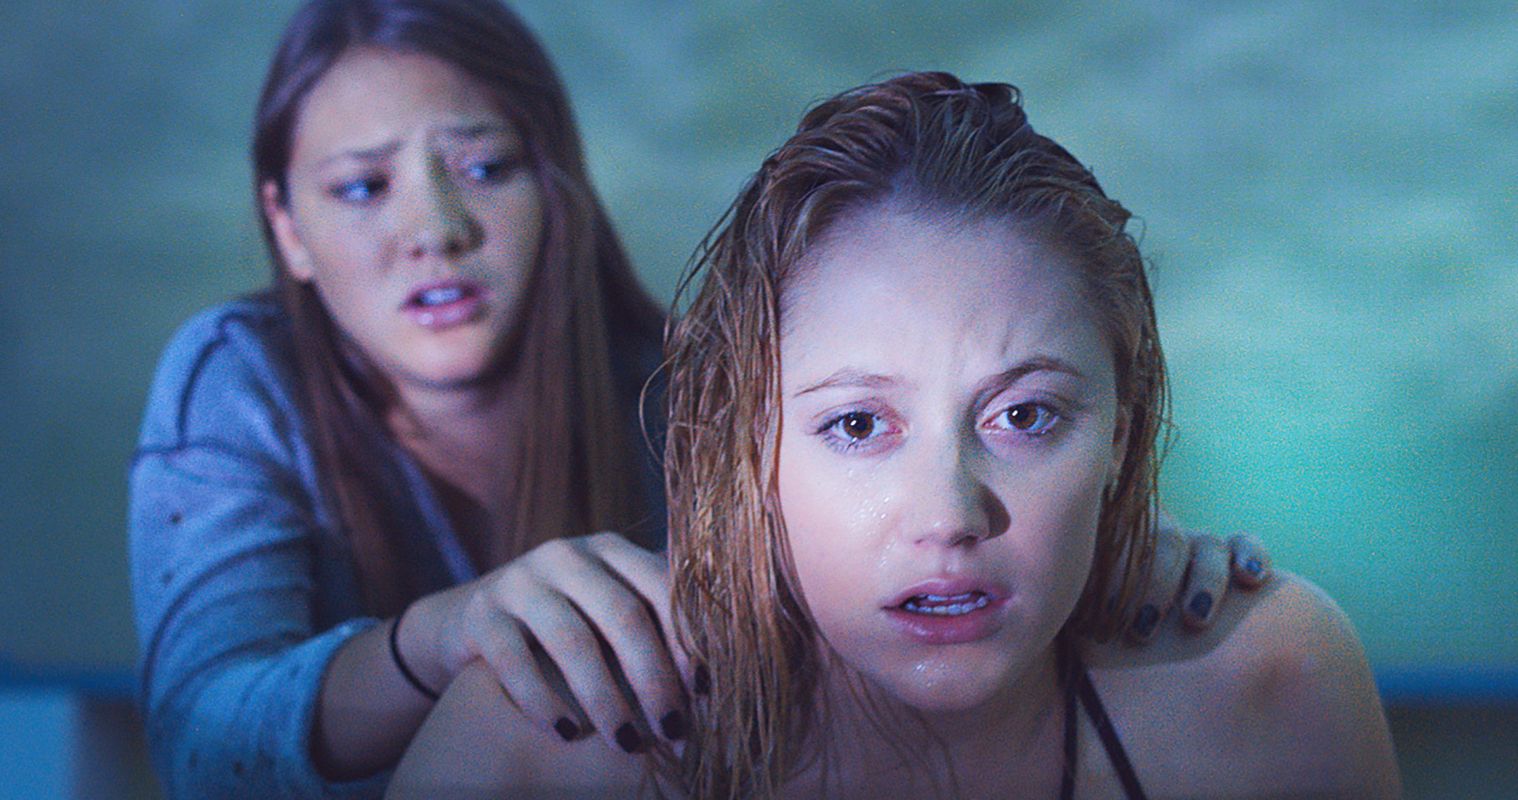 If It Follows 2 Happens, Maika Monroe Definitely Wants to Be There